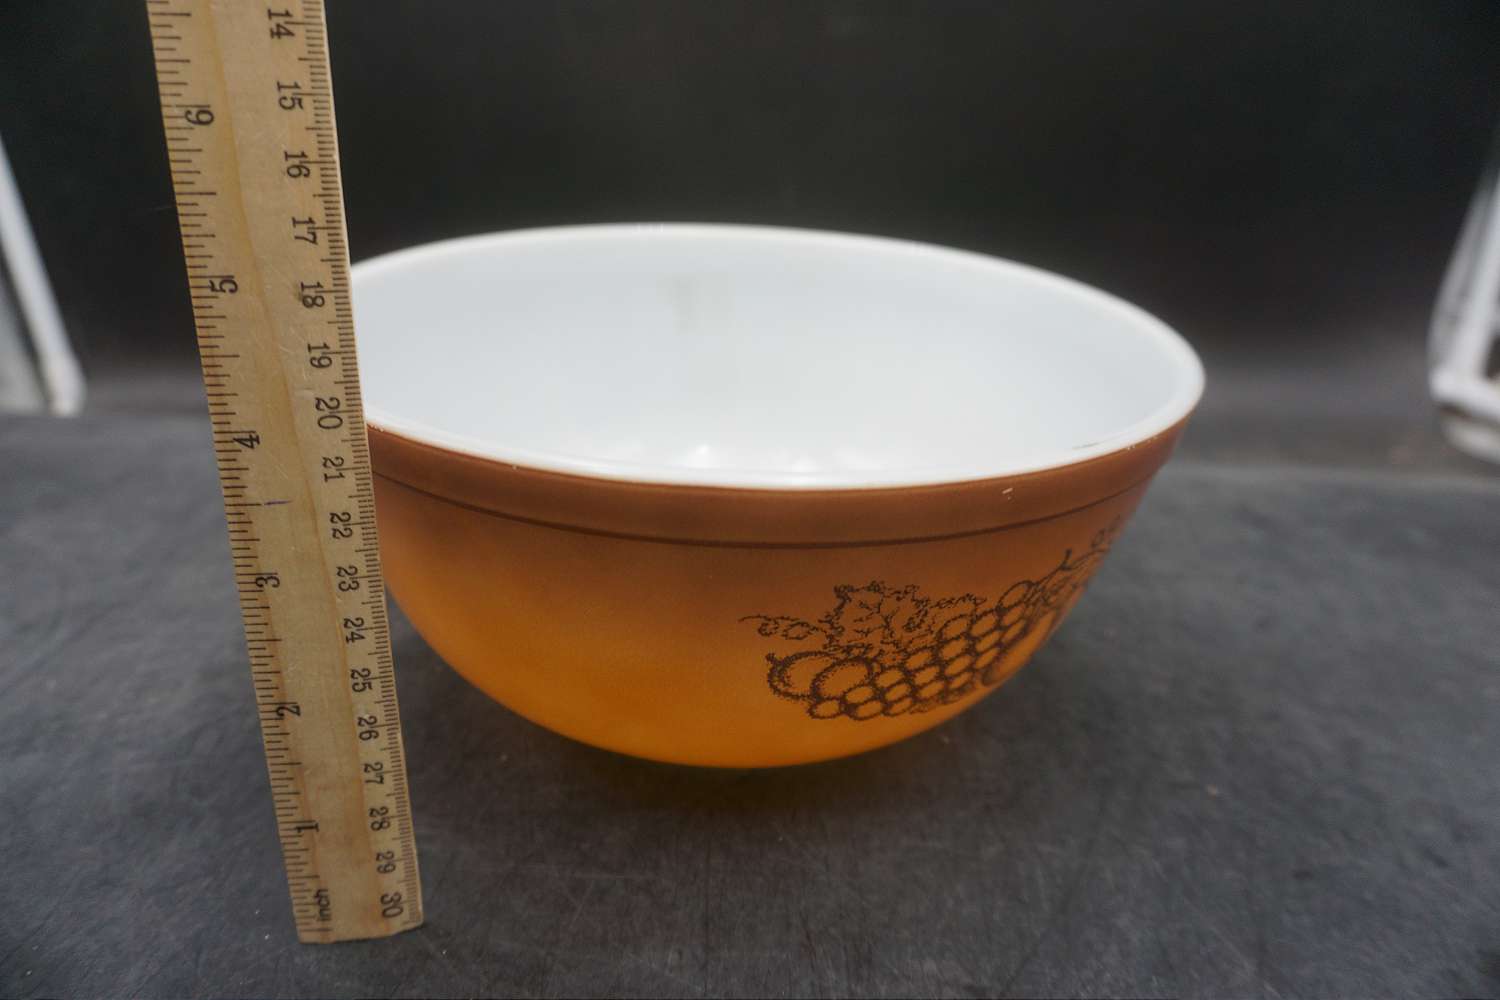 Small Pyrex Old Orchard Mixing Bowl